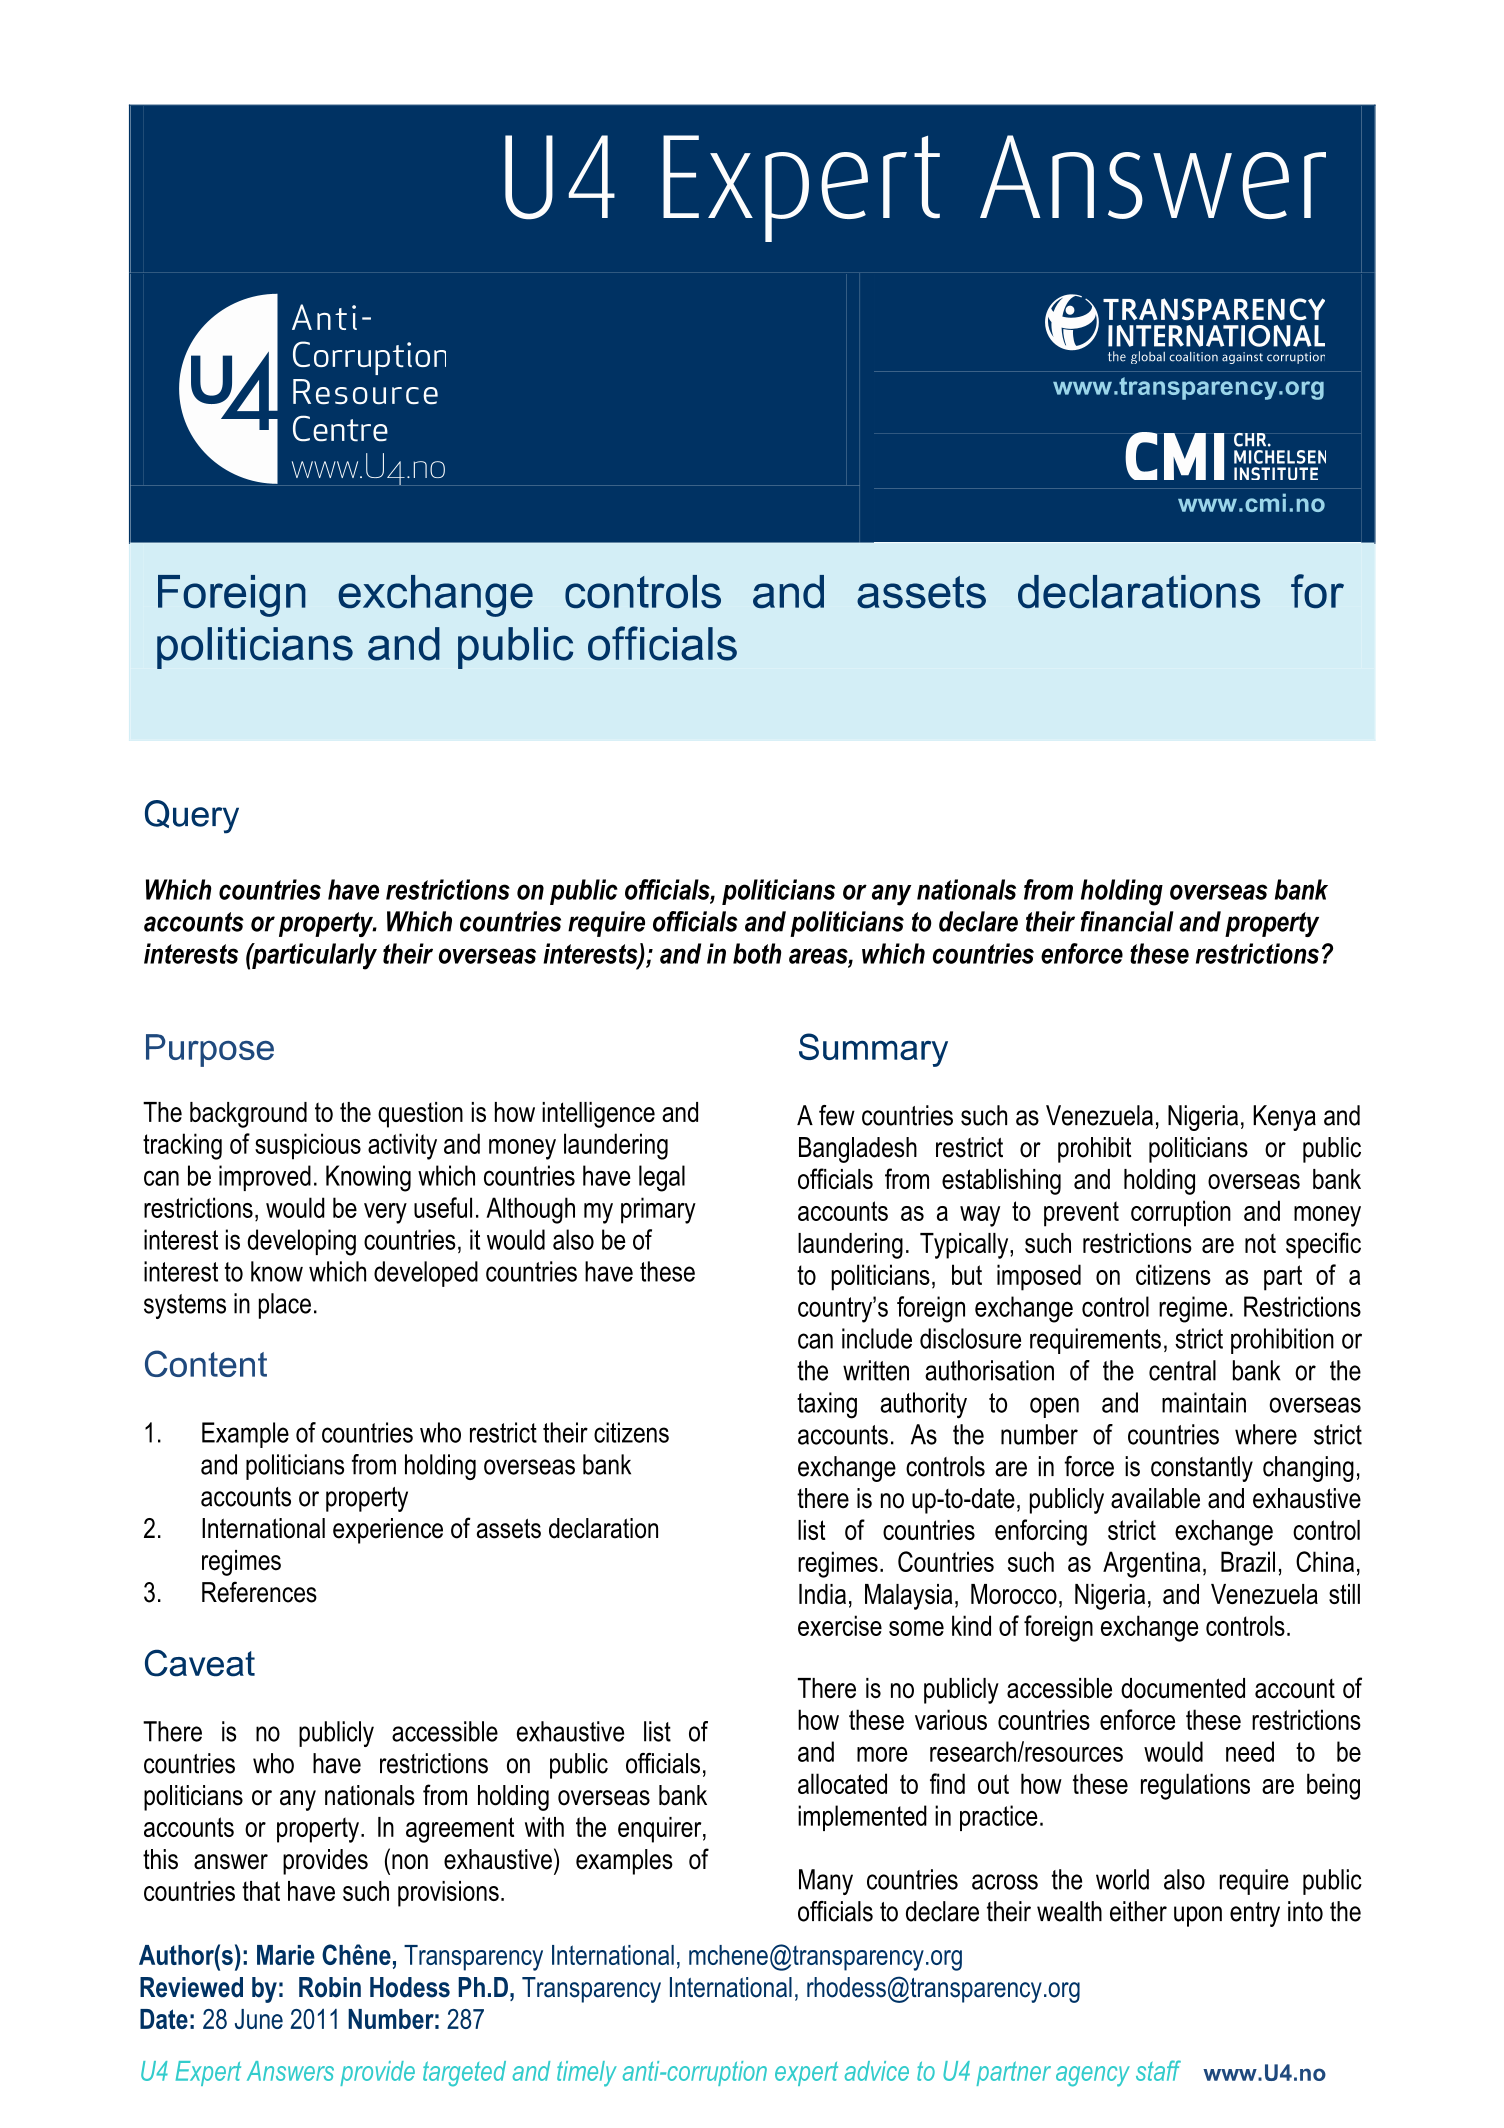 Foreign exchange controls and assets declarations for politicians and public officials